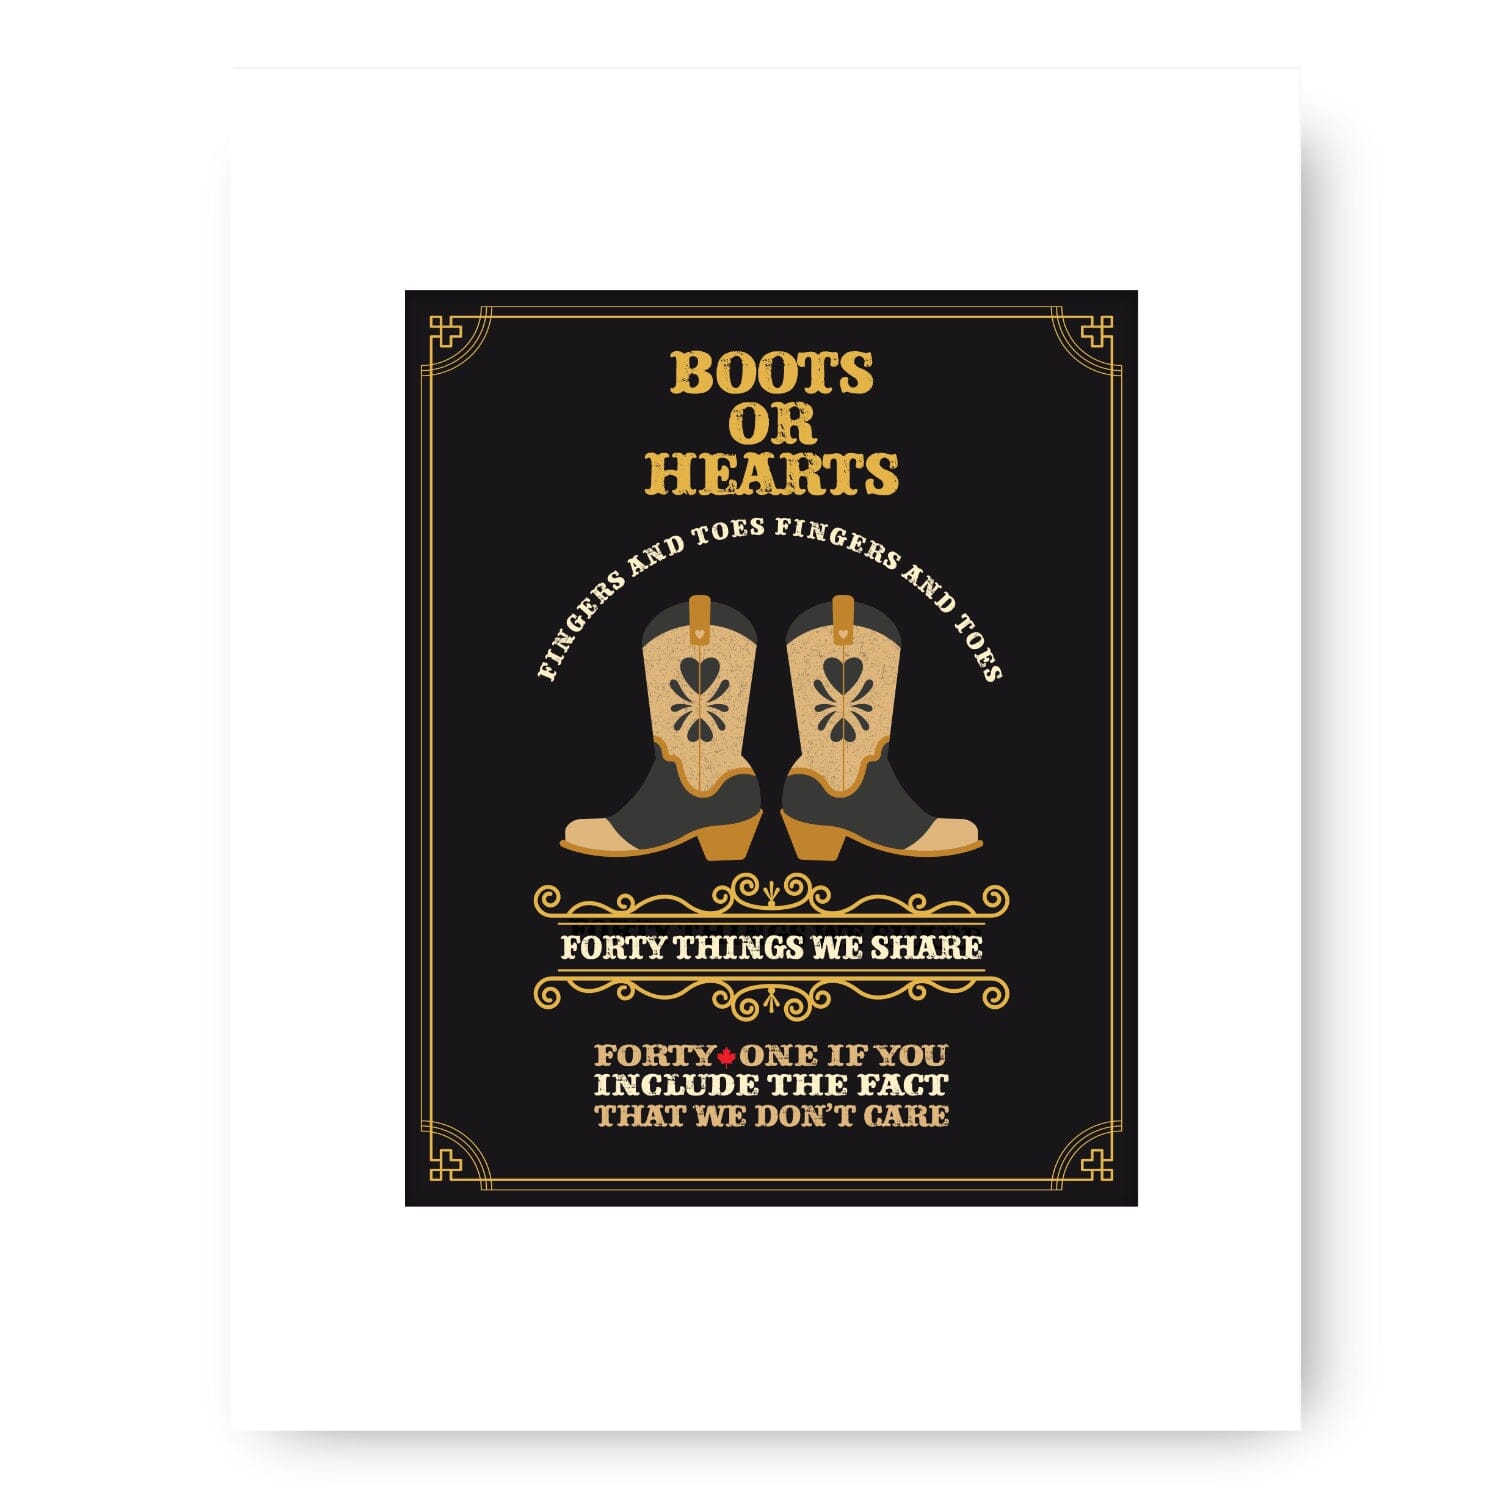 Boots or Hearts by the Tragically Hip - Music Wall Art Print Song Lyrics Art Song Lyrics Art 8x10 White Matted Print 